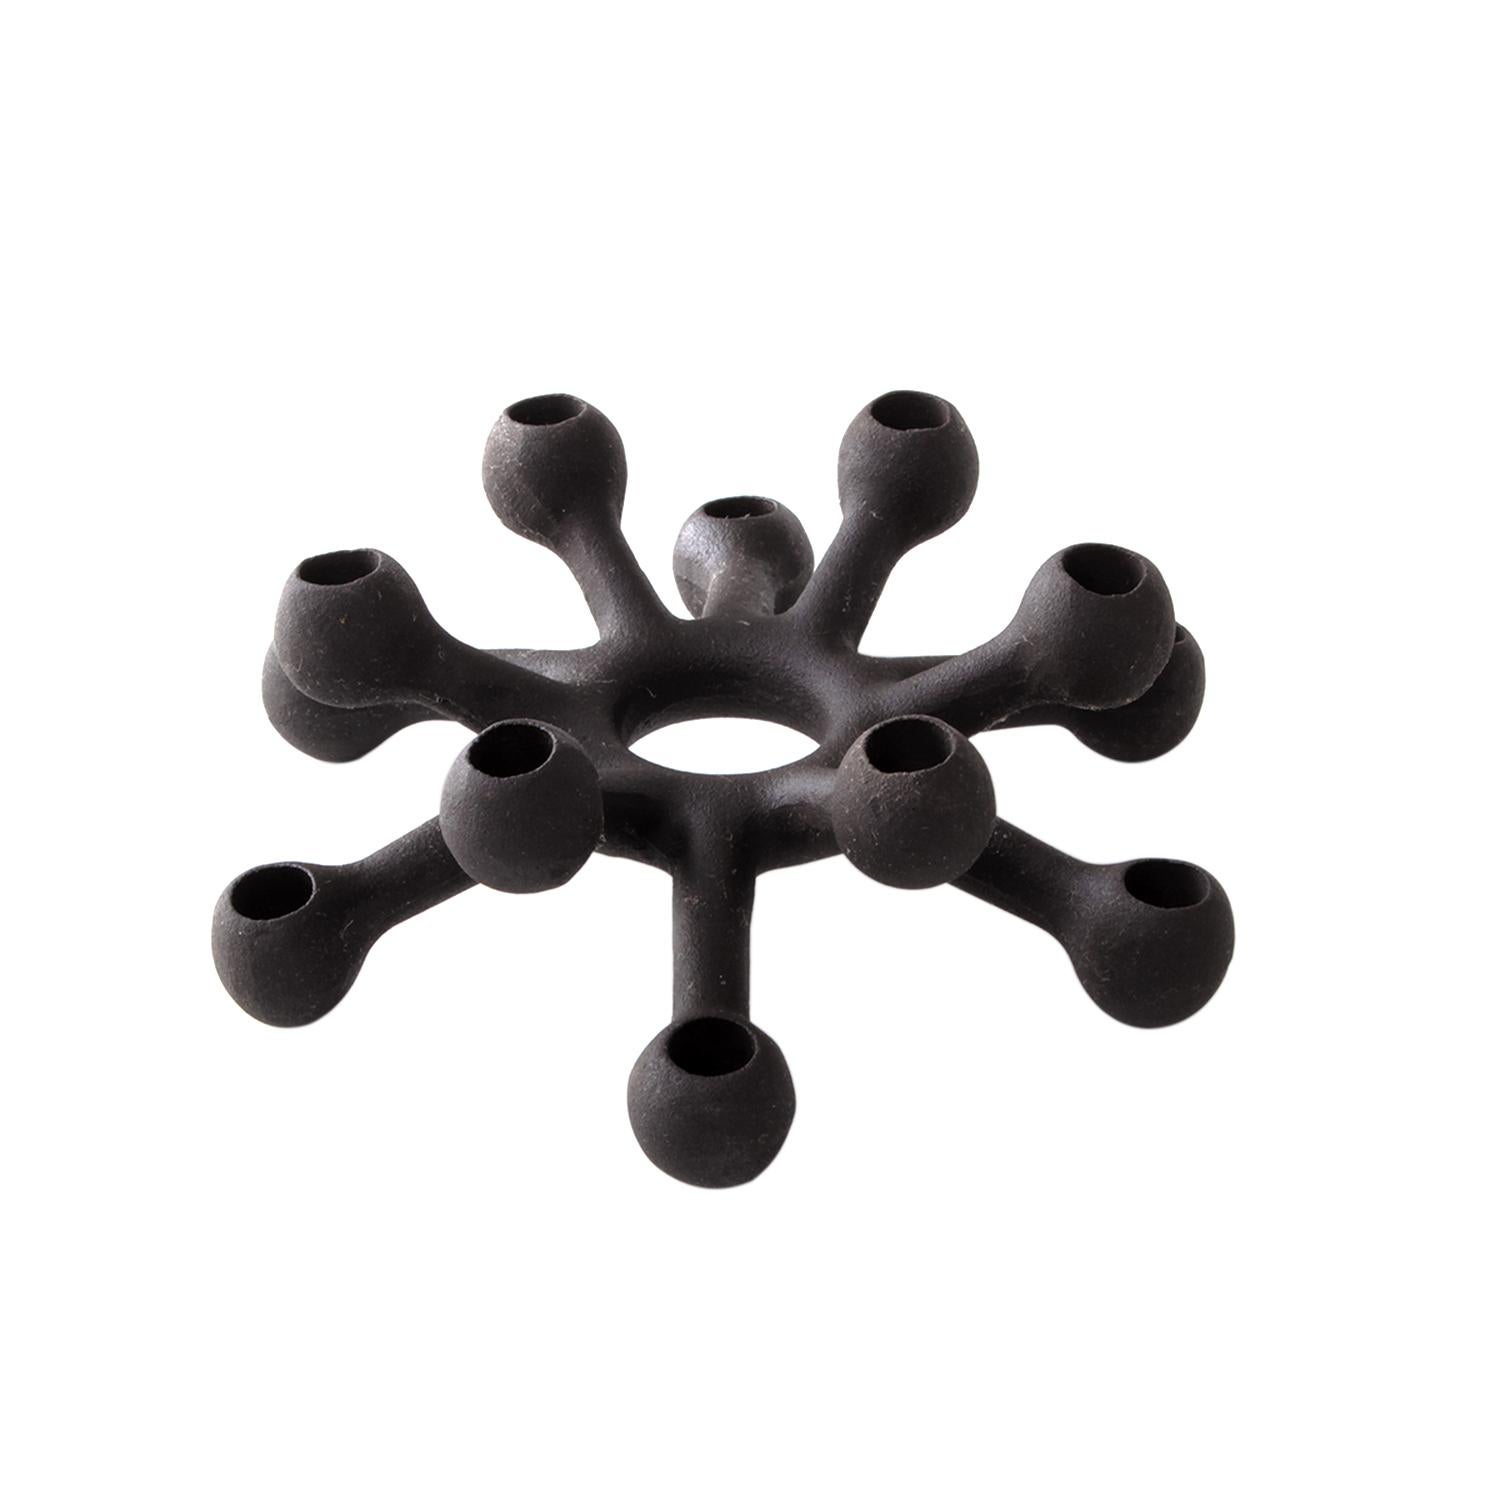 Spider by Jens Quistgaard for Dansk Designs in 1963, Including 3PK New Candles